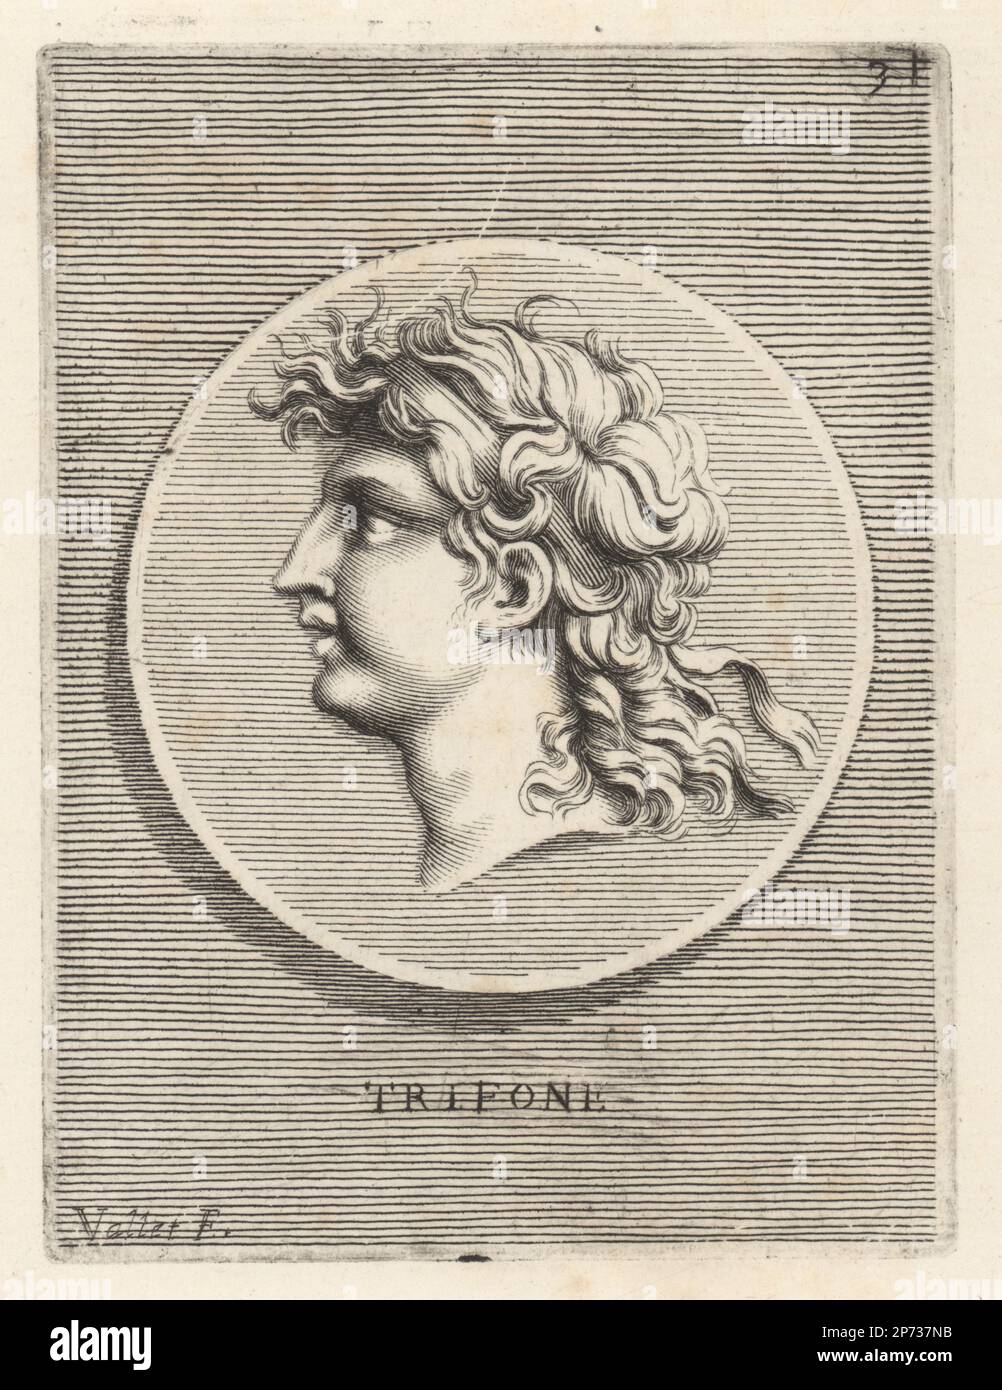 Diodotus Tryphon, nicknamed The Magnificent, Greek king of the Seleucid Empire.  Head of a young man in royal diadem from a coin. Trifone. Copperplate engraving by  Guillaume Vallet after Giovanni Angelo Canini from Iconografia, cioe disegni d'imagini de famosissimi monarchi, regi, filososi, poeti ed oratori dell' Antichita, Drawings of images of famous monarchs, kings, philosophers, poets and orators of Antiquity, Ignatio de’Lazari, Rome, 1699. Stock Photo